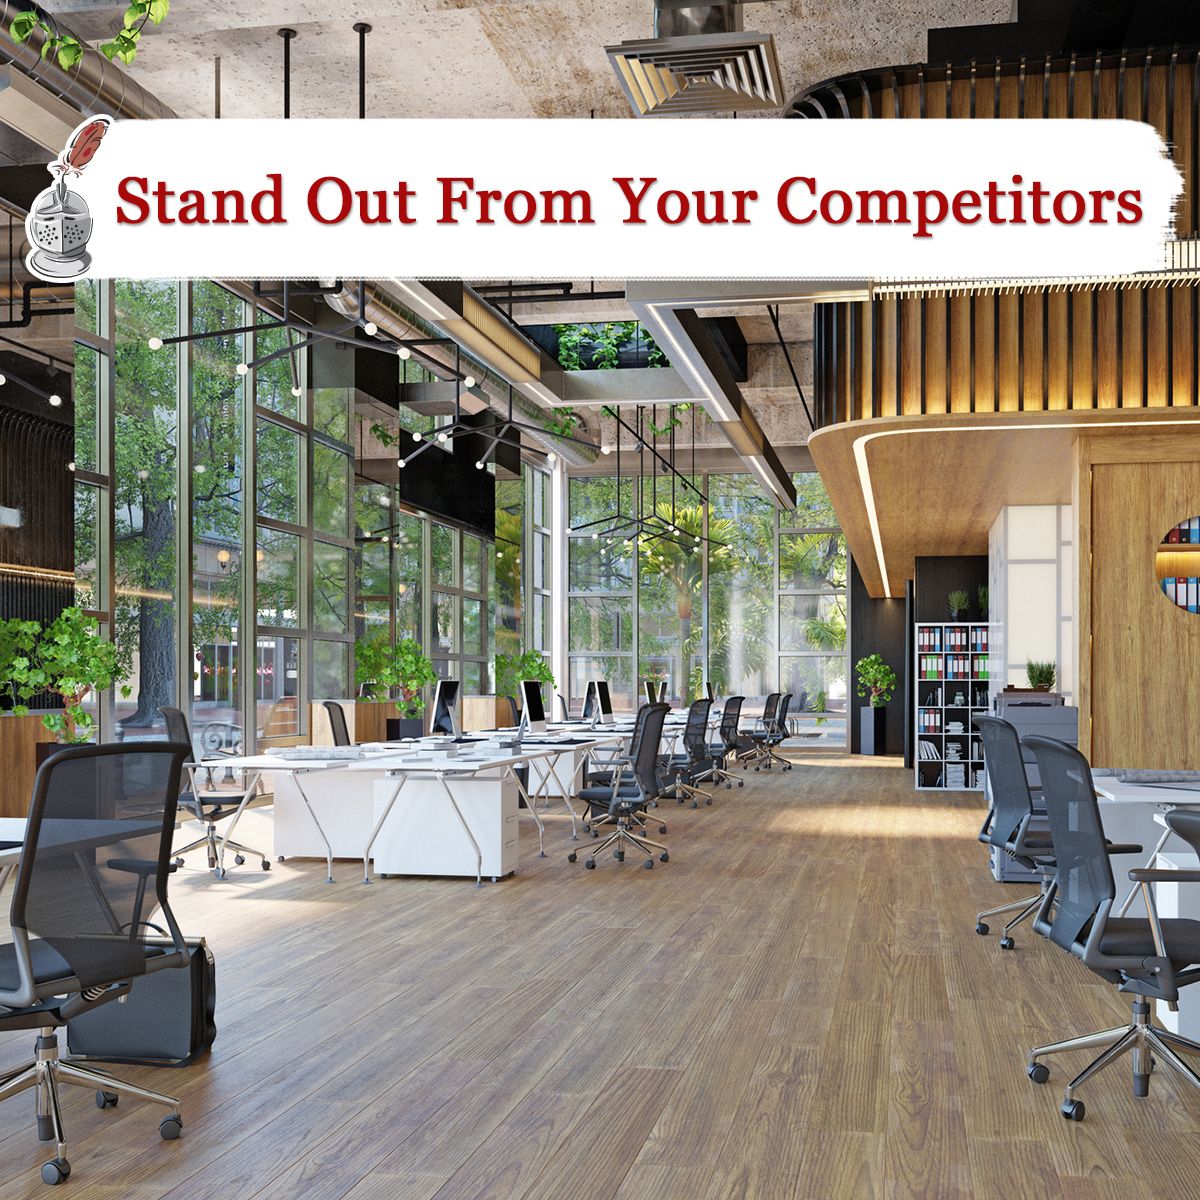 Stand Out From Your Competitors